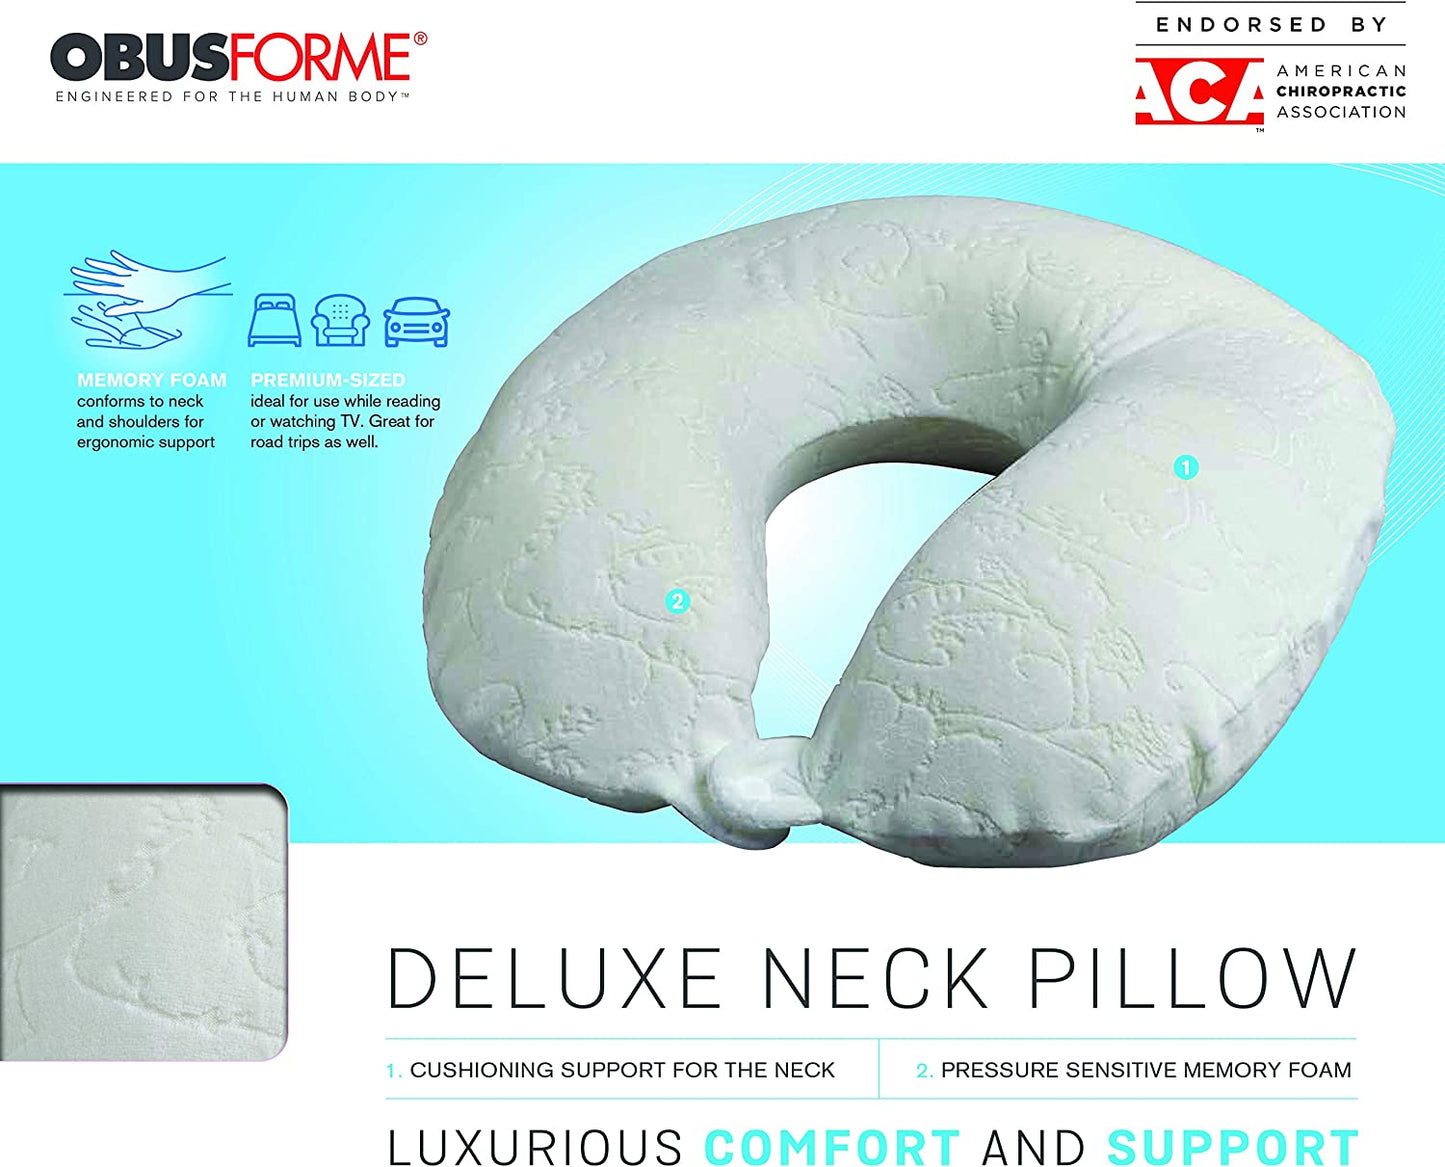 Memory Foam Neck Travel Pillow for Neck and Shoulder Support